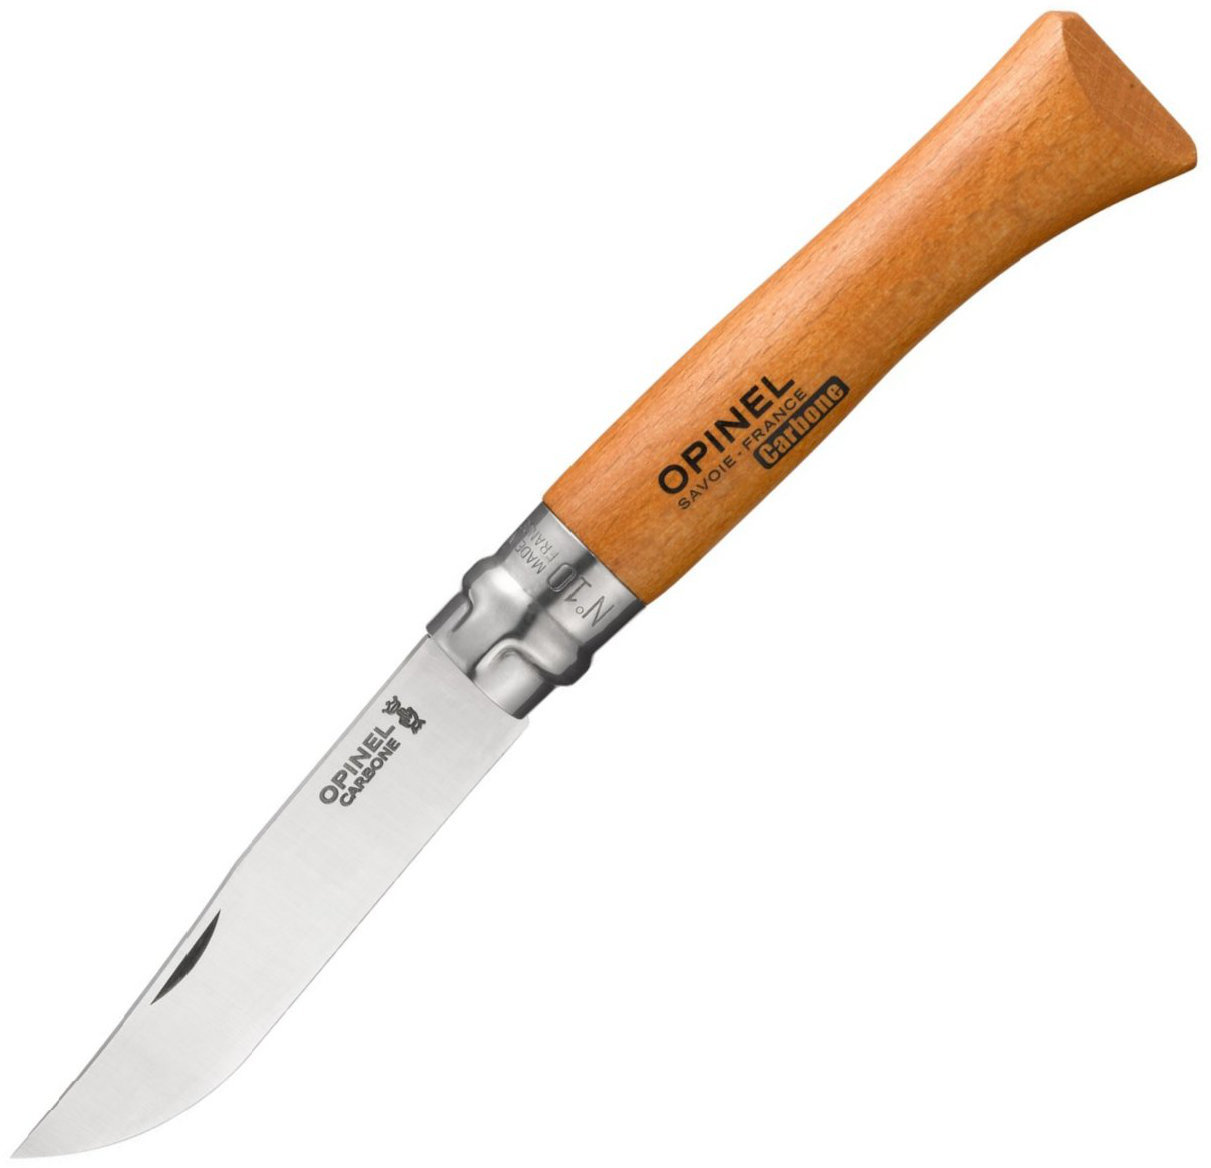 Cuchillo turístico Opinel N°10 Carbon Blister Pack